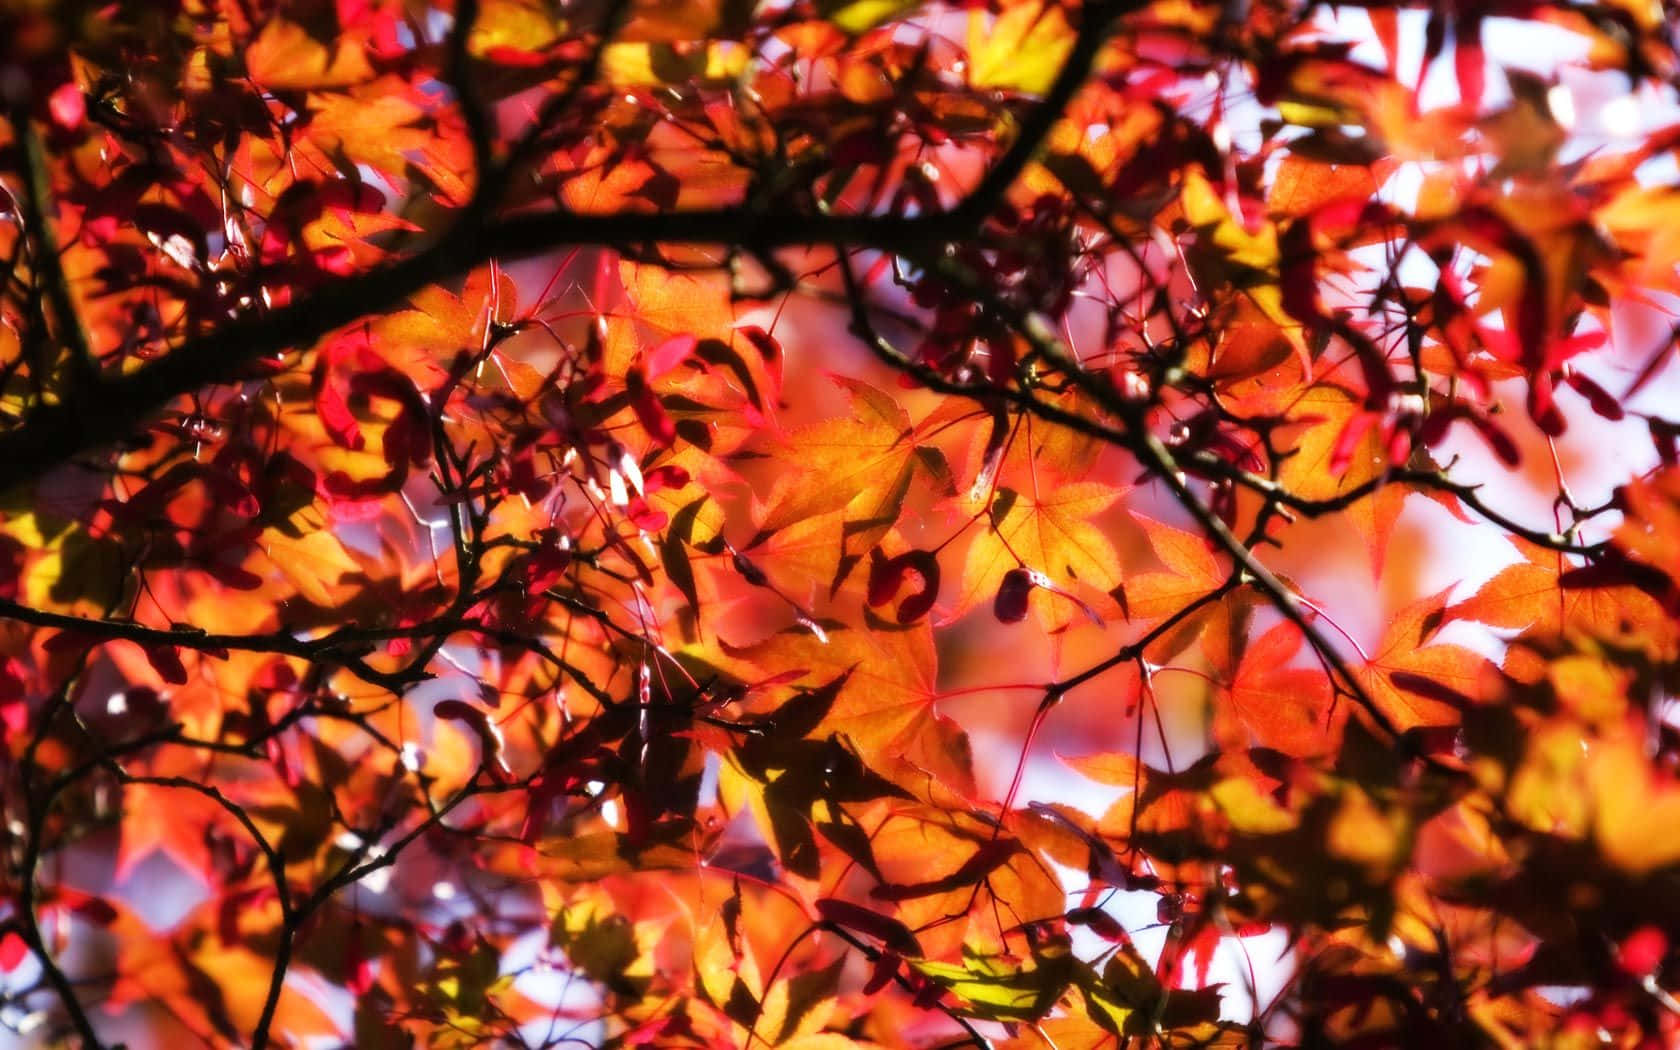 "Experience the beauty of the changing season" Wallpaper